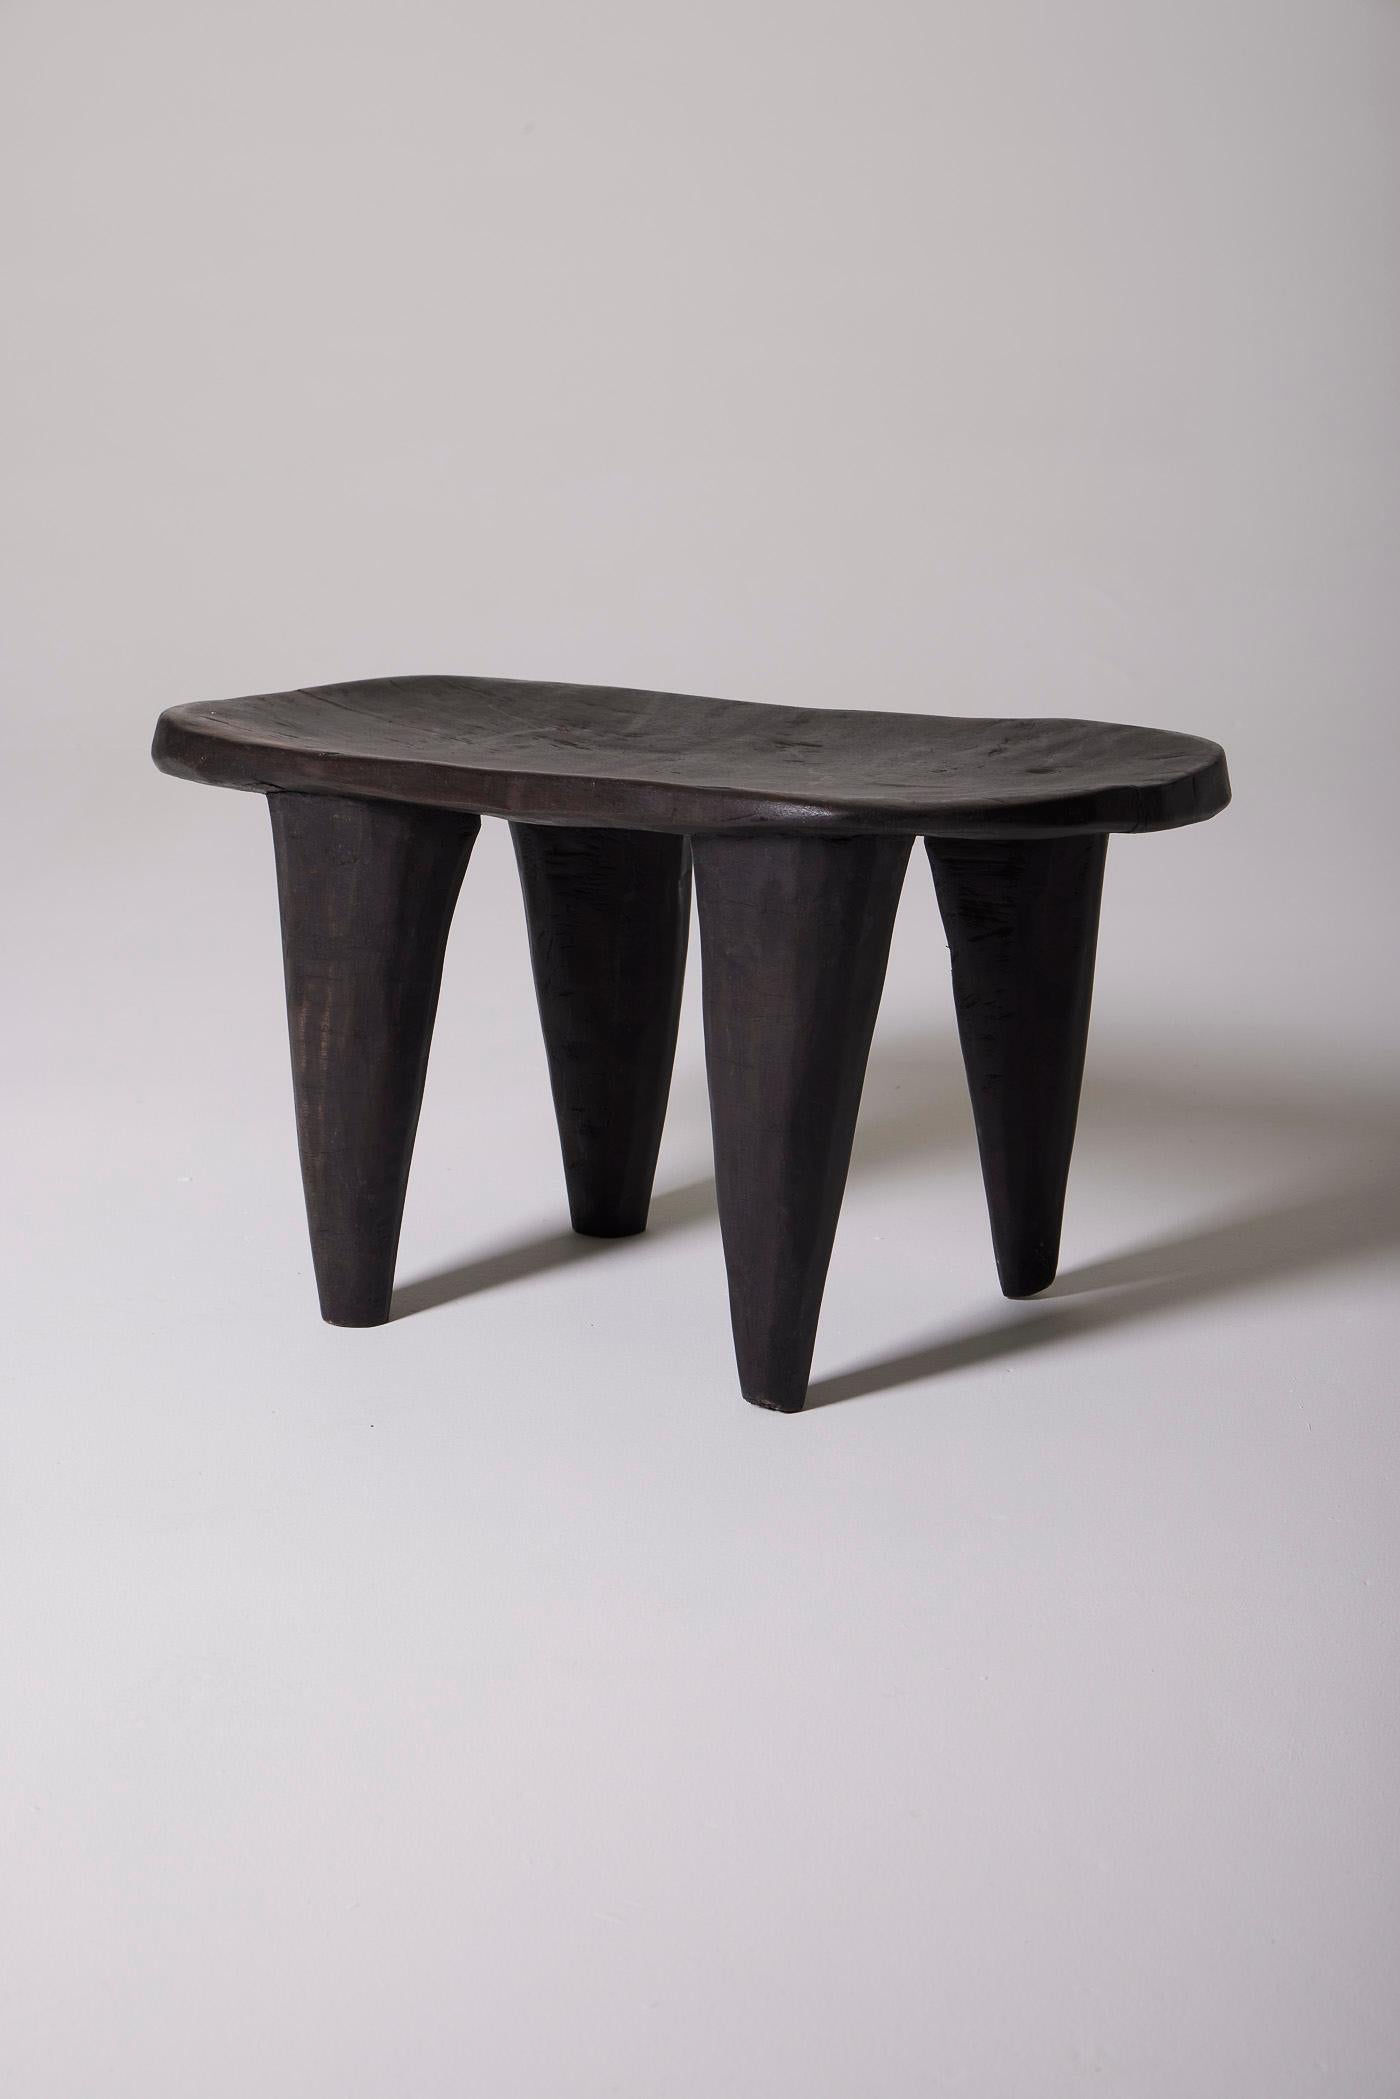 Senoufo stool, African artisanal work. In perfect condition.
LP2649